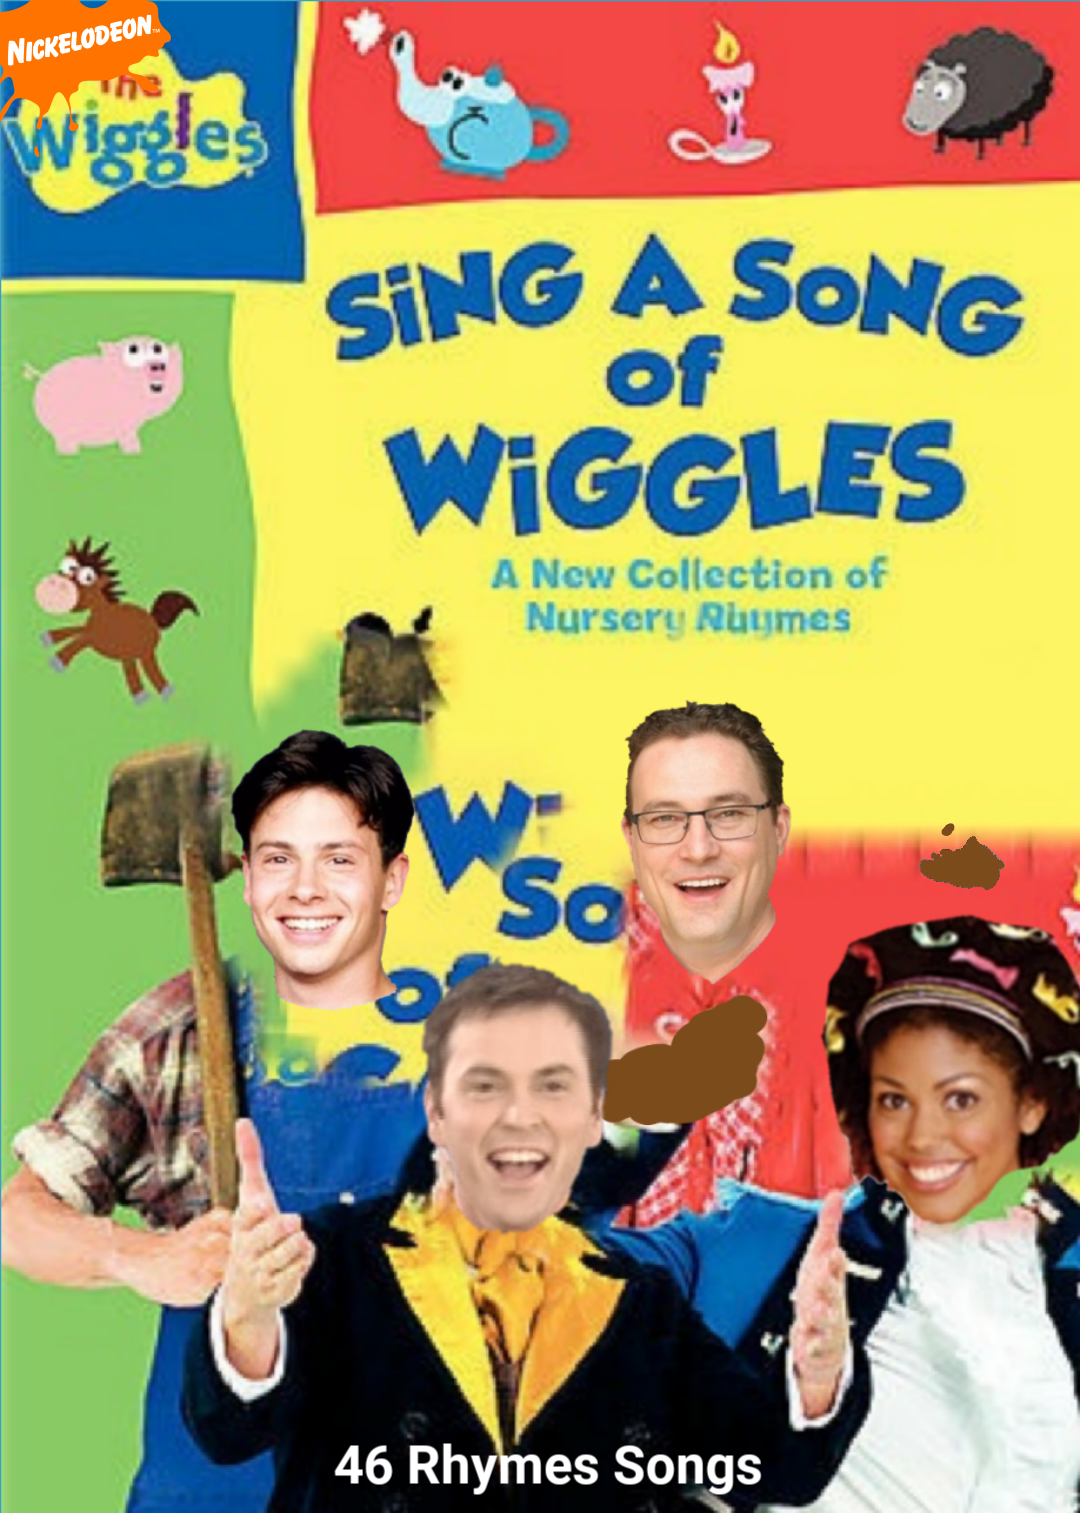 Nick Jr's The Wiggles Sing a Song of Wiggles (video) | Kidsandfamily4 Wiki  | Fandom